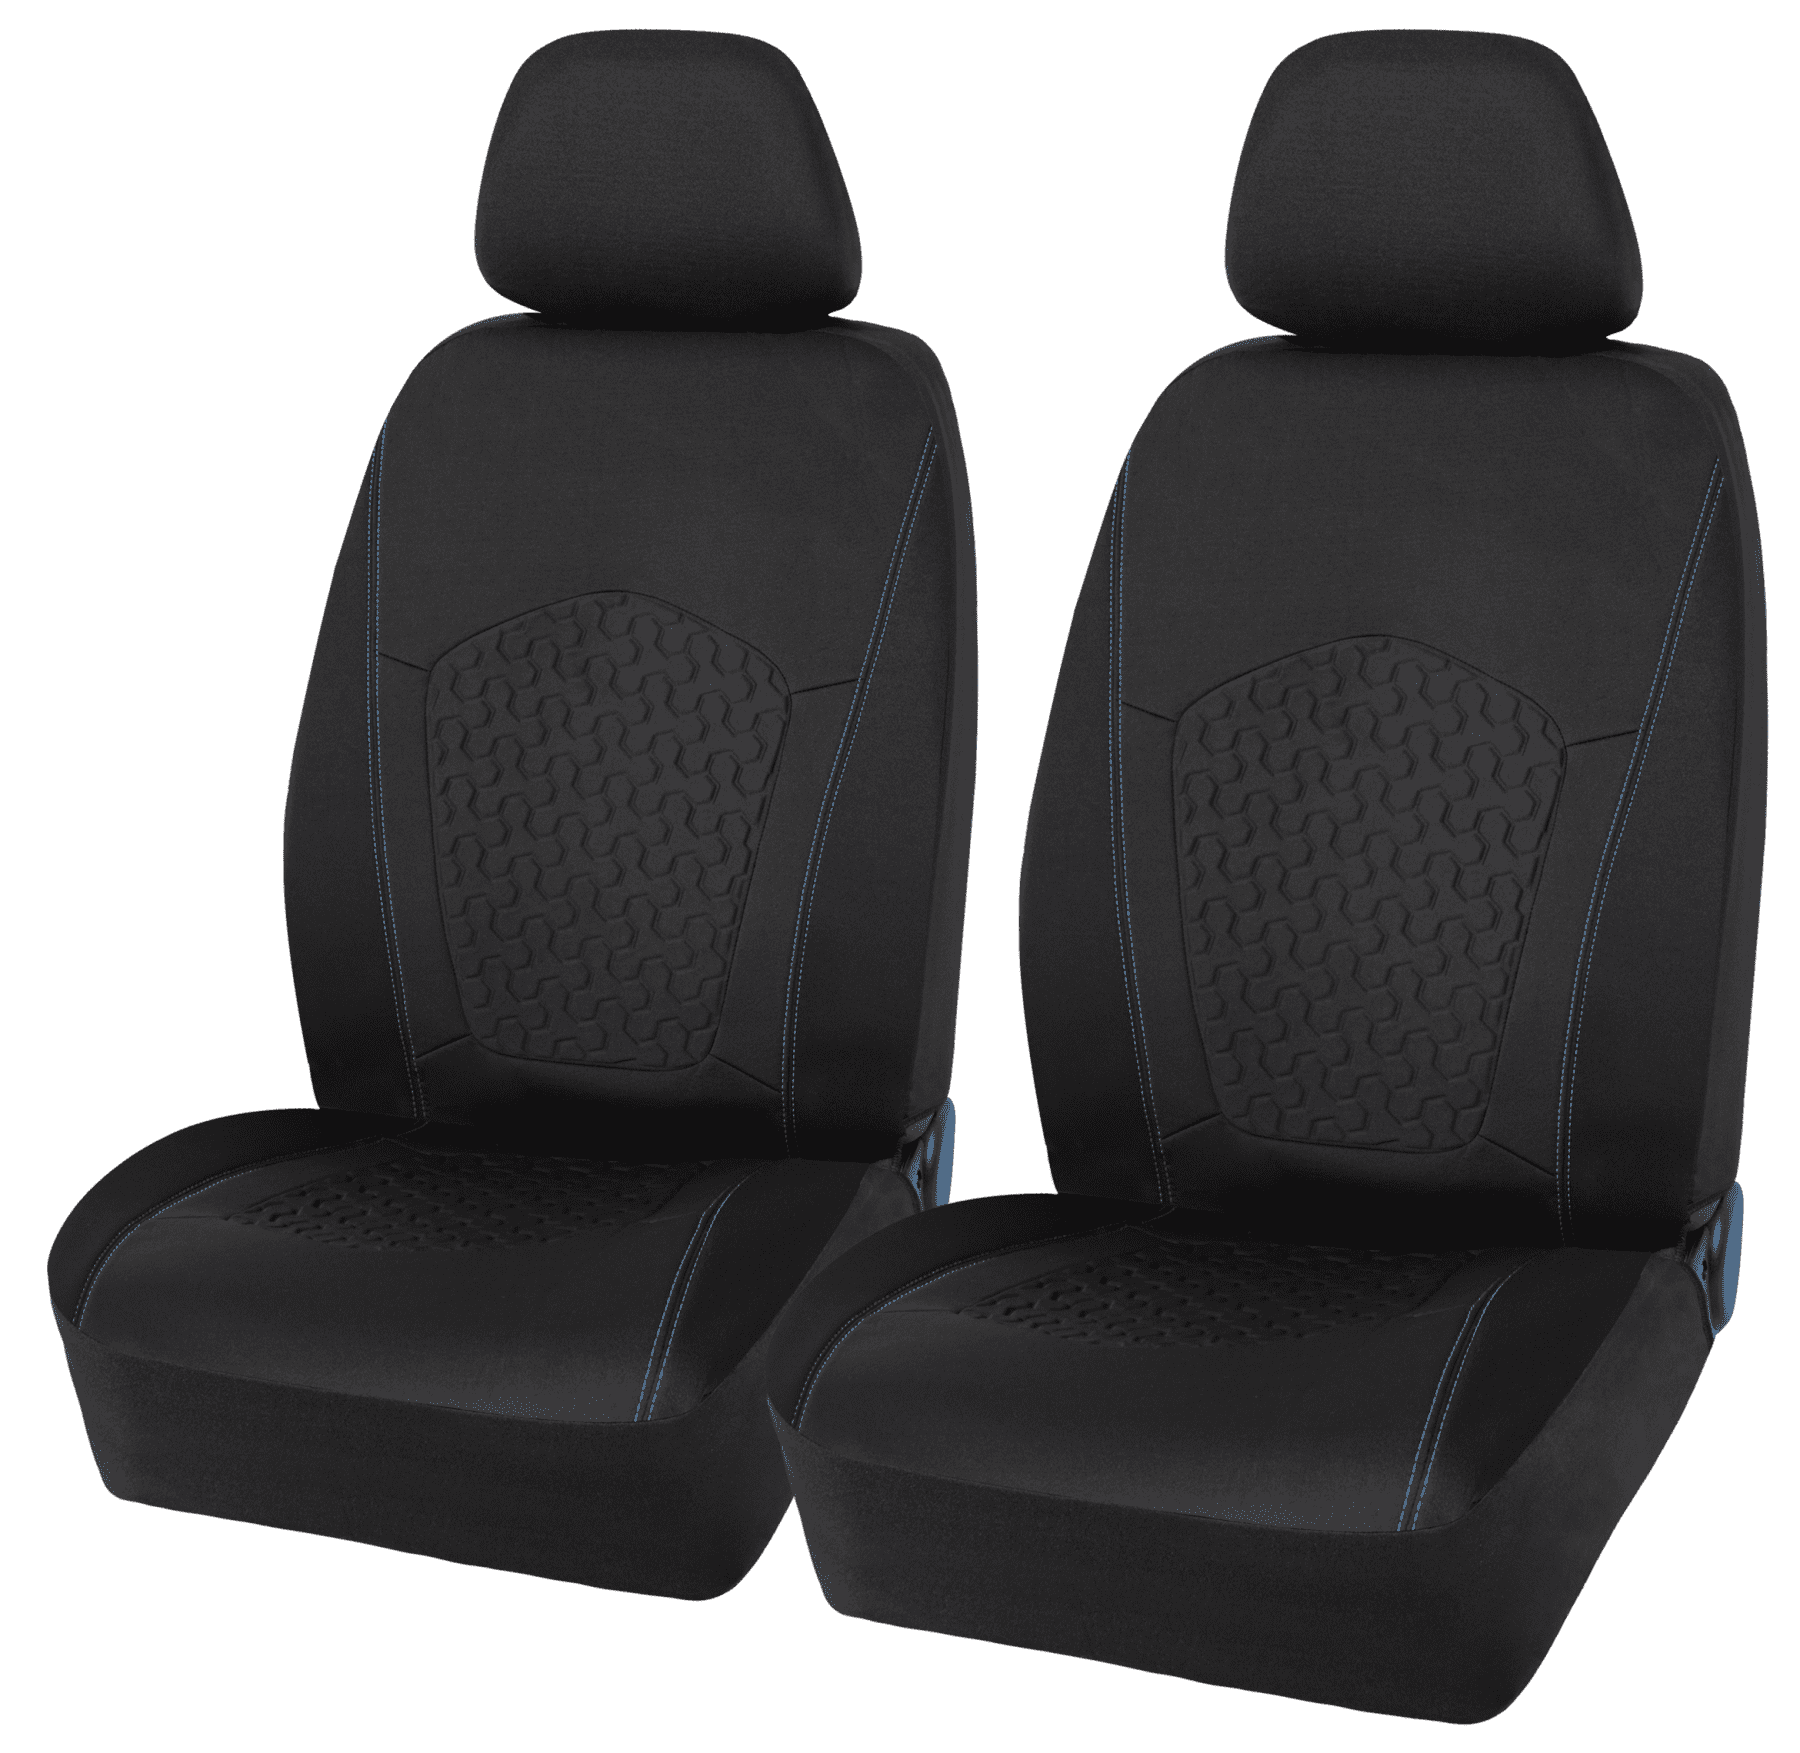 Snagshout  2 Pack Leather Front Car Seat Covers, Universal Sideless Car  Seat Protectors with Storage Pocket and Seat Belt Pads, Waterproof Vehicle  Seat Cover Automotive Seat Cushions for Cars Trucks SUV(Black)